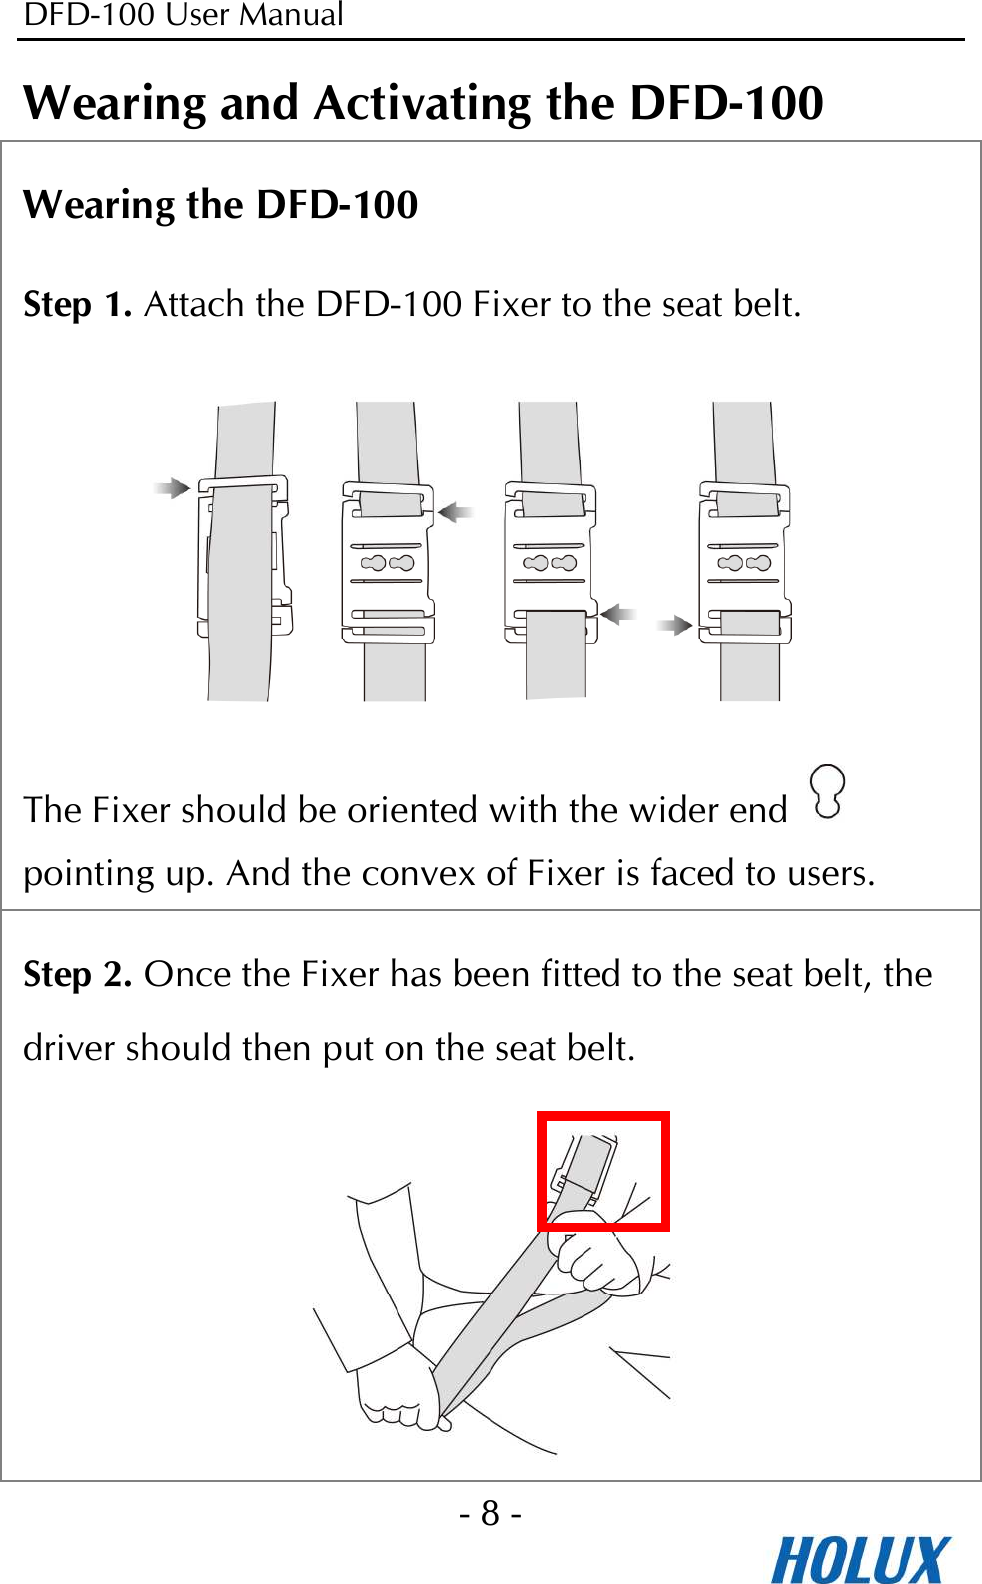 DFD-100 User Manual - 8 -  Wearing and Activating the DFD-100 Wearing the DFD-100 Step 1. Attach the DFD-100 Fixer to the seat belt.    The Fixer should be oriented with the wider end   pointing up. And the convex of Fixer is faced to users. Step 2. Once the Fixer has been fitted to the seat belt, the driver should then put on the seat belt.  